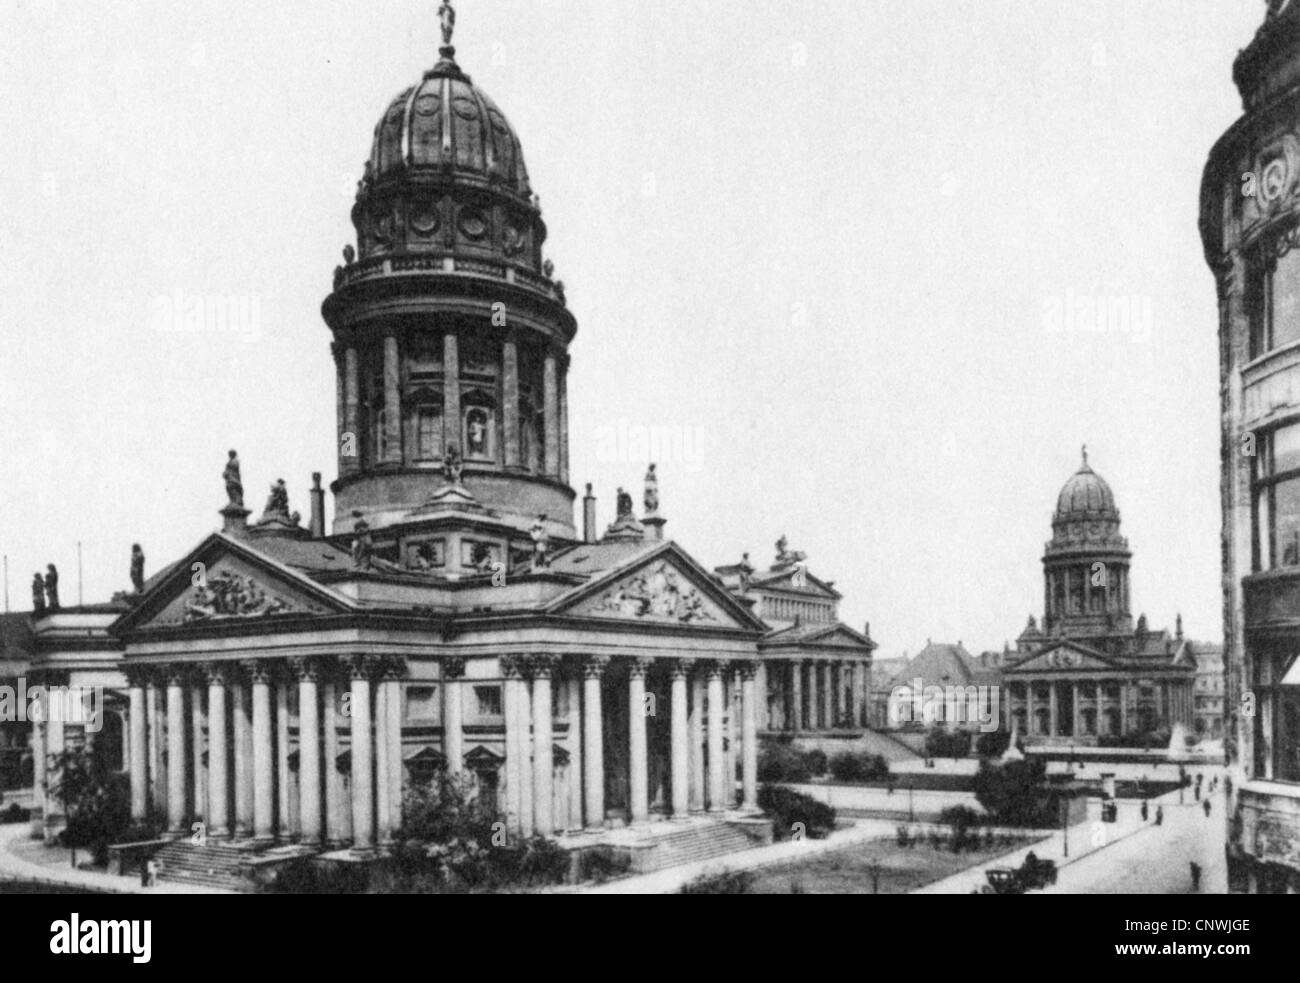 geography / travel, Germany, Berlin, Gendarmenmarkt (1909), square, squares, church, churches, French cathedral, German cathedral, exterior view, Berlin-Mitte, city center, town center, city centres, city centers, town centres, town centers, the city, inner city, midtown, city centre, town centre, urban core, Old Berlin, beadhouse, bedehouse, sacred building, sacred buildings, architecture, Central Germany, Germany, Central Europe, Europe, Prussia, metropolis, German Empire, Imperial Era, historic, historical, 20th century, people, 1900s, Additional-Rights-Clearences-Not Available Stock Photo